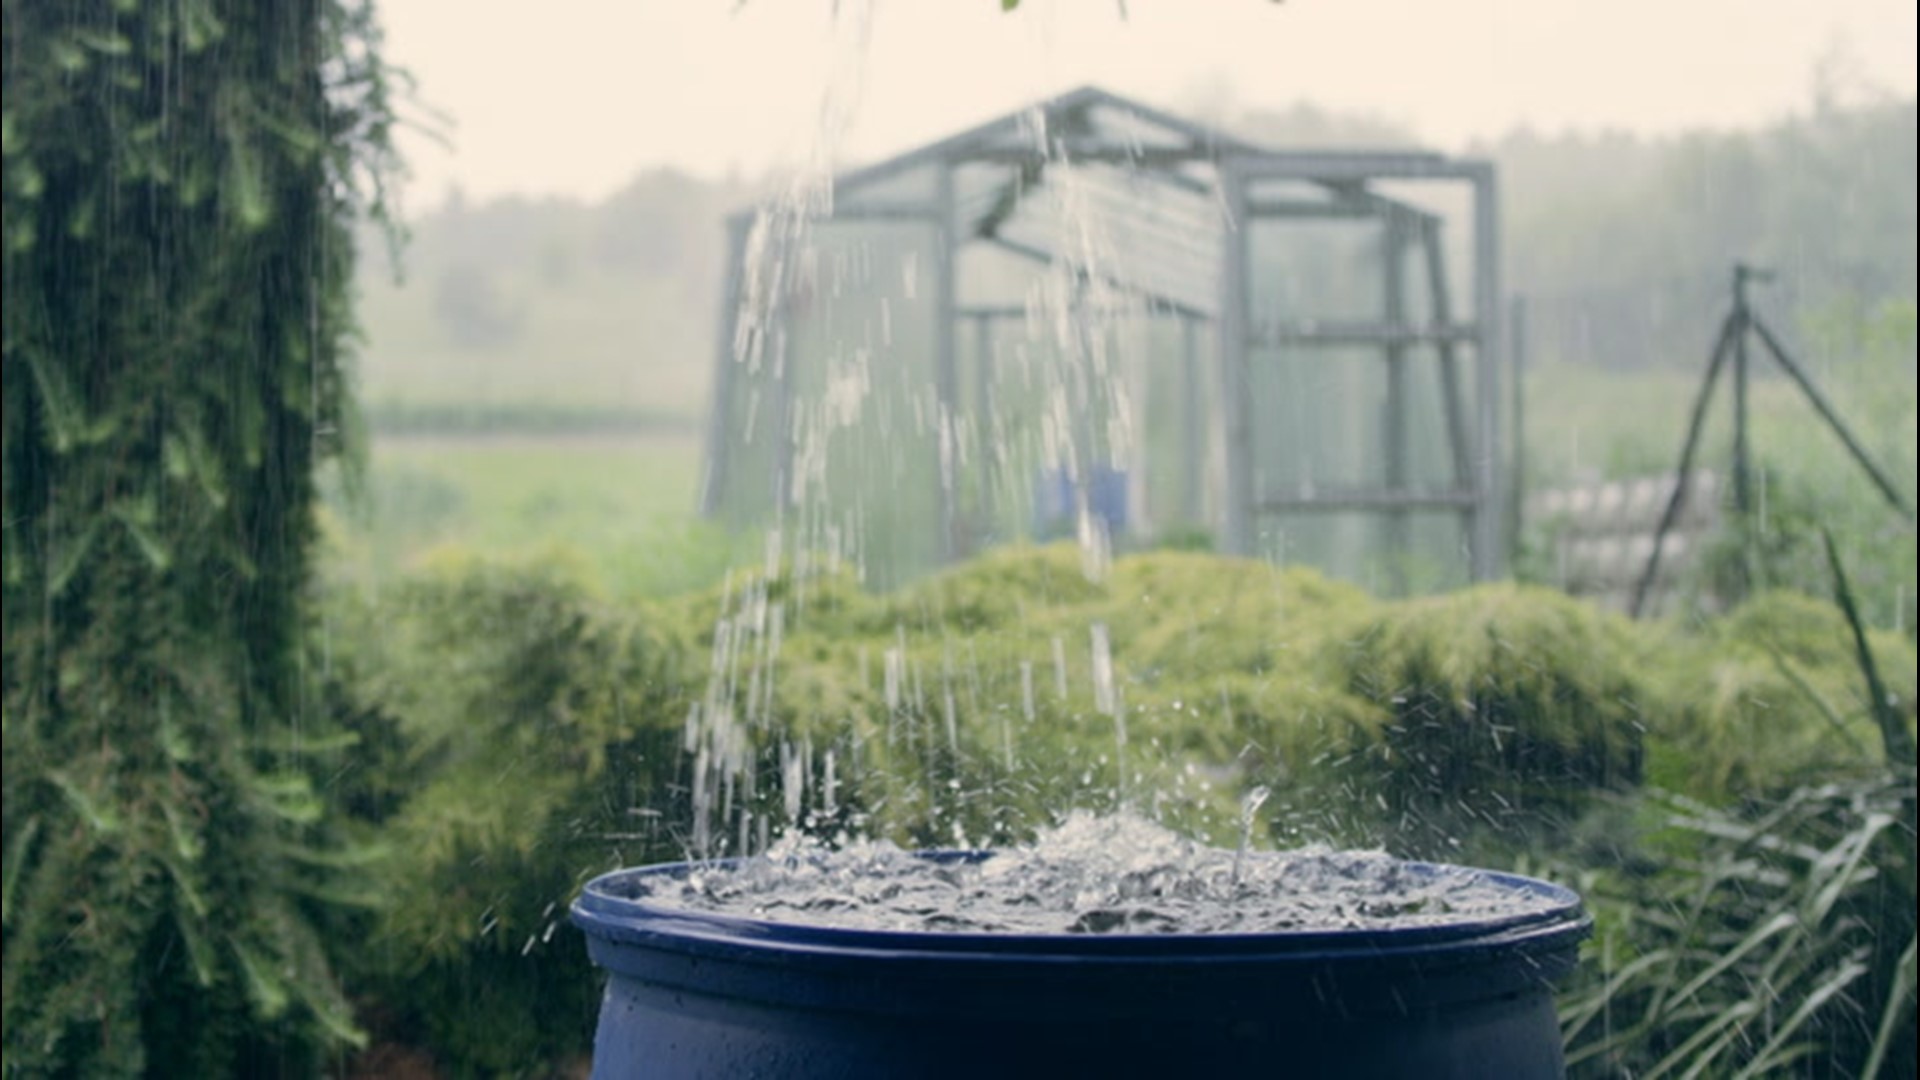 With millions of people living in areas dealing with increasing drought and rising water costs, many are learning how to harvest rainwater.